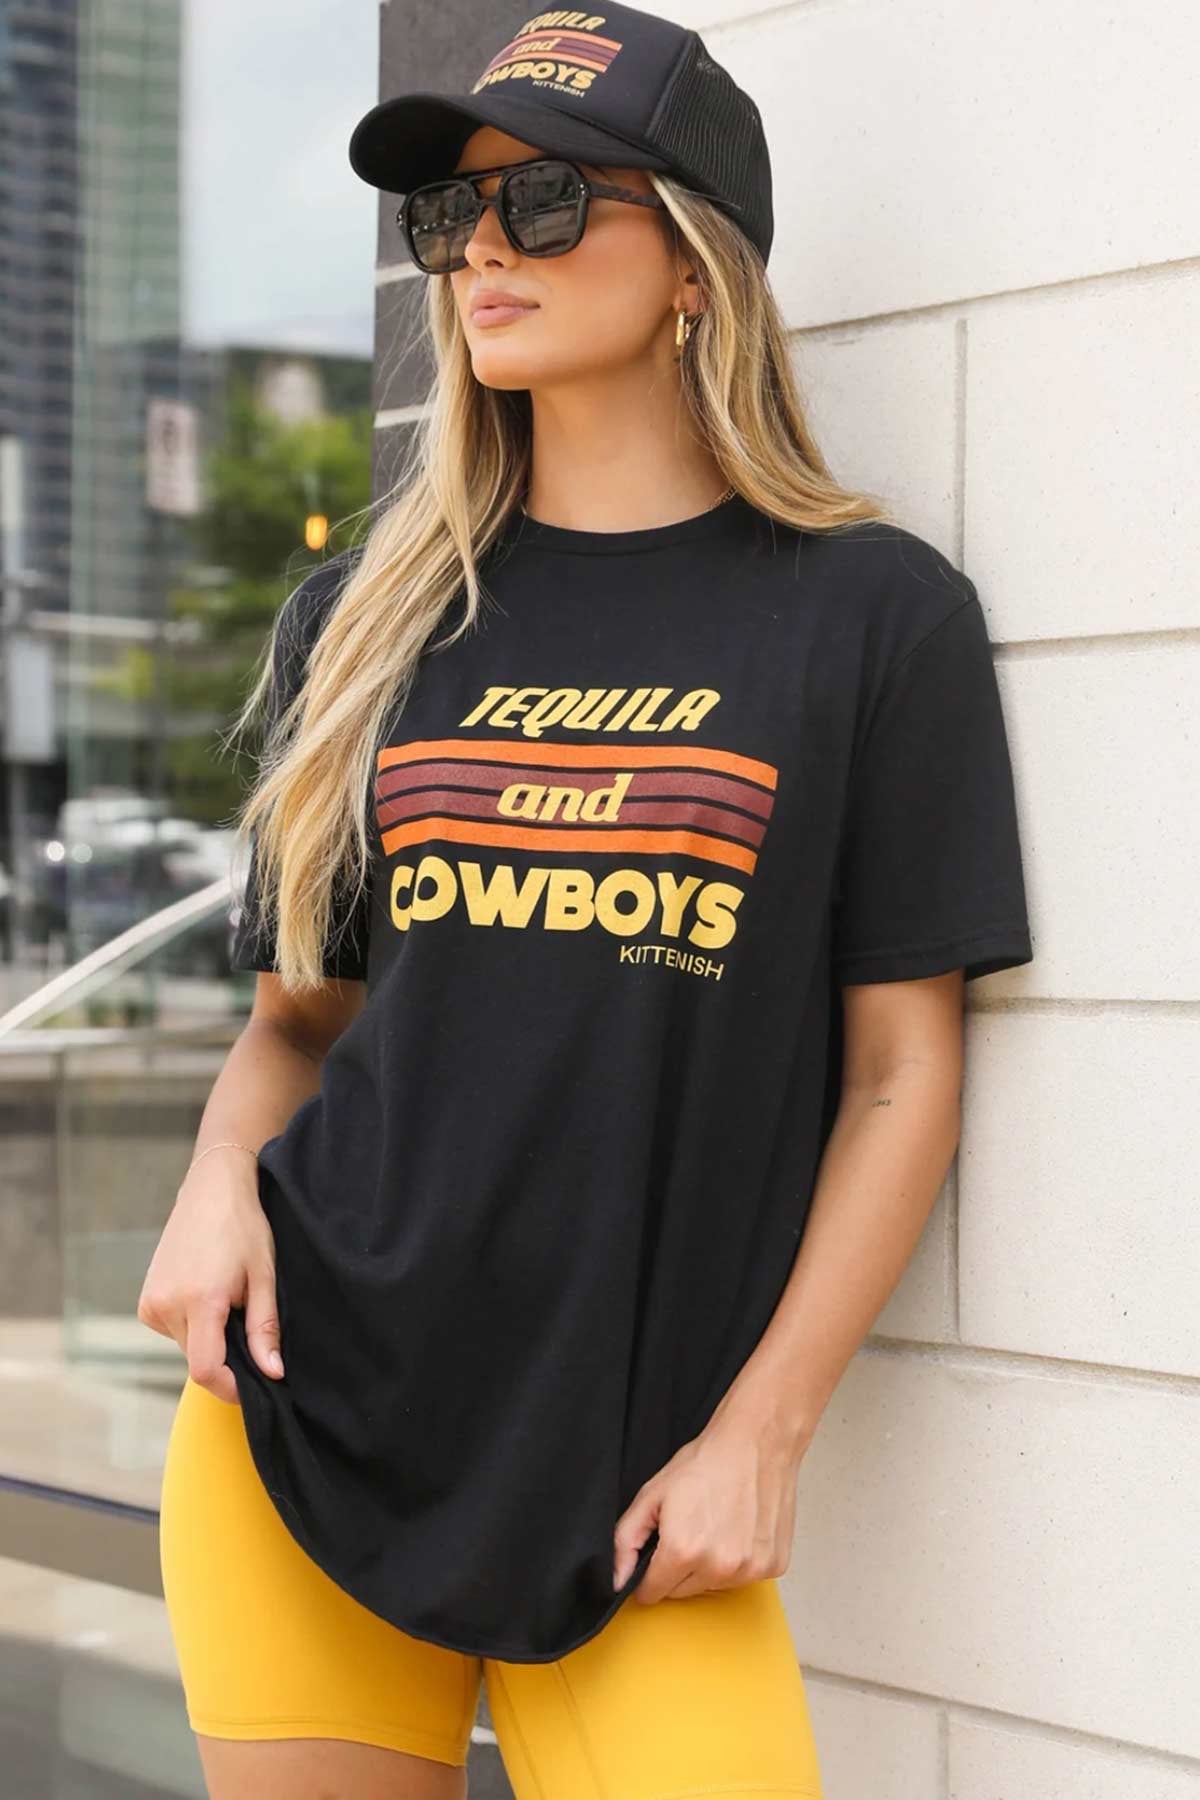 TEQUILA AND COWBOYS TEE – Kittenish